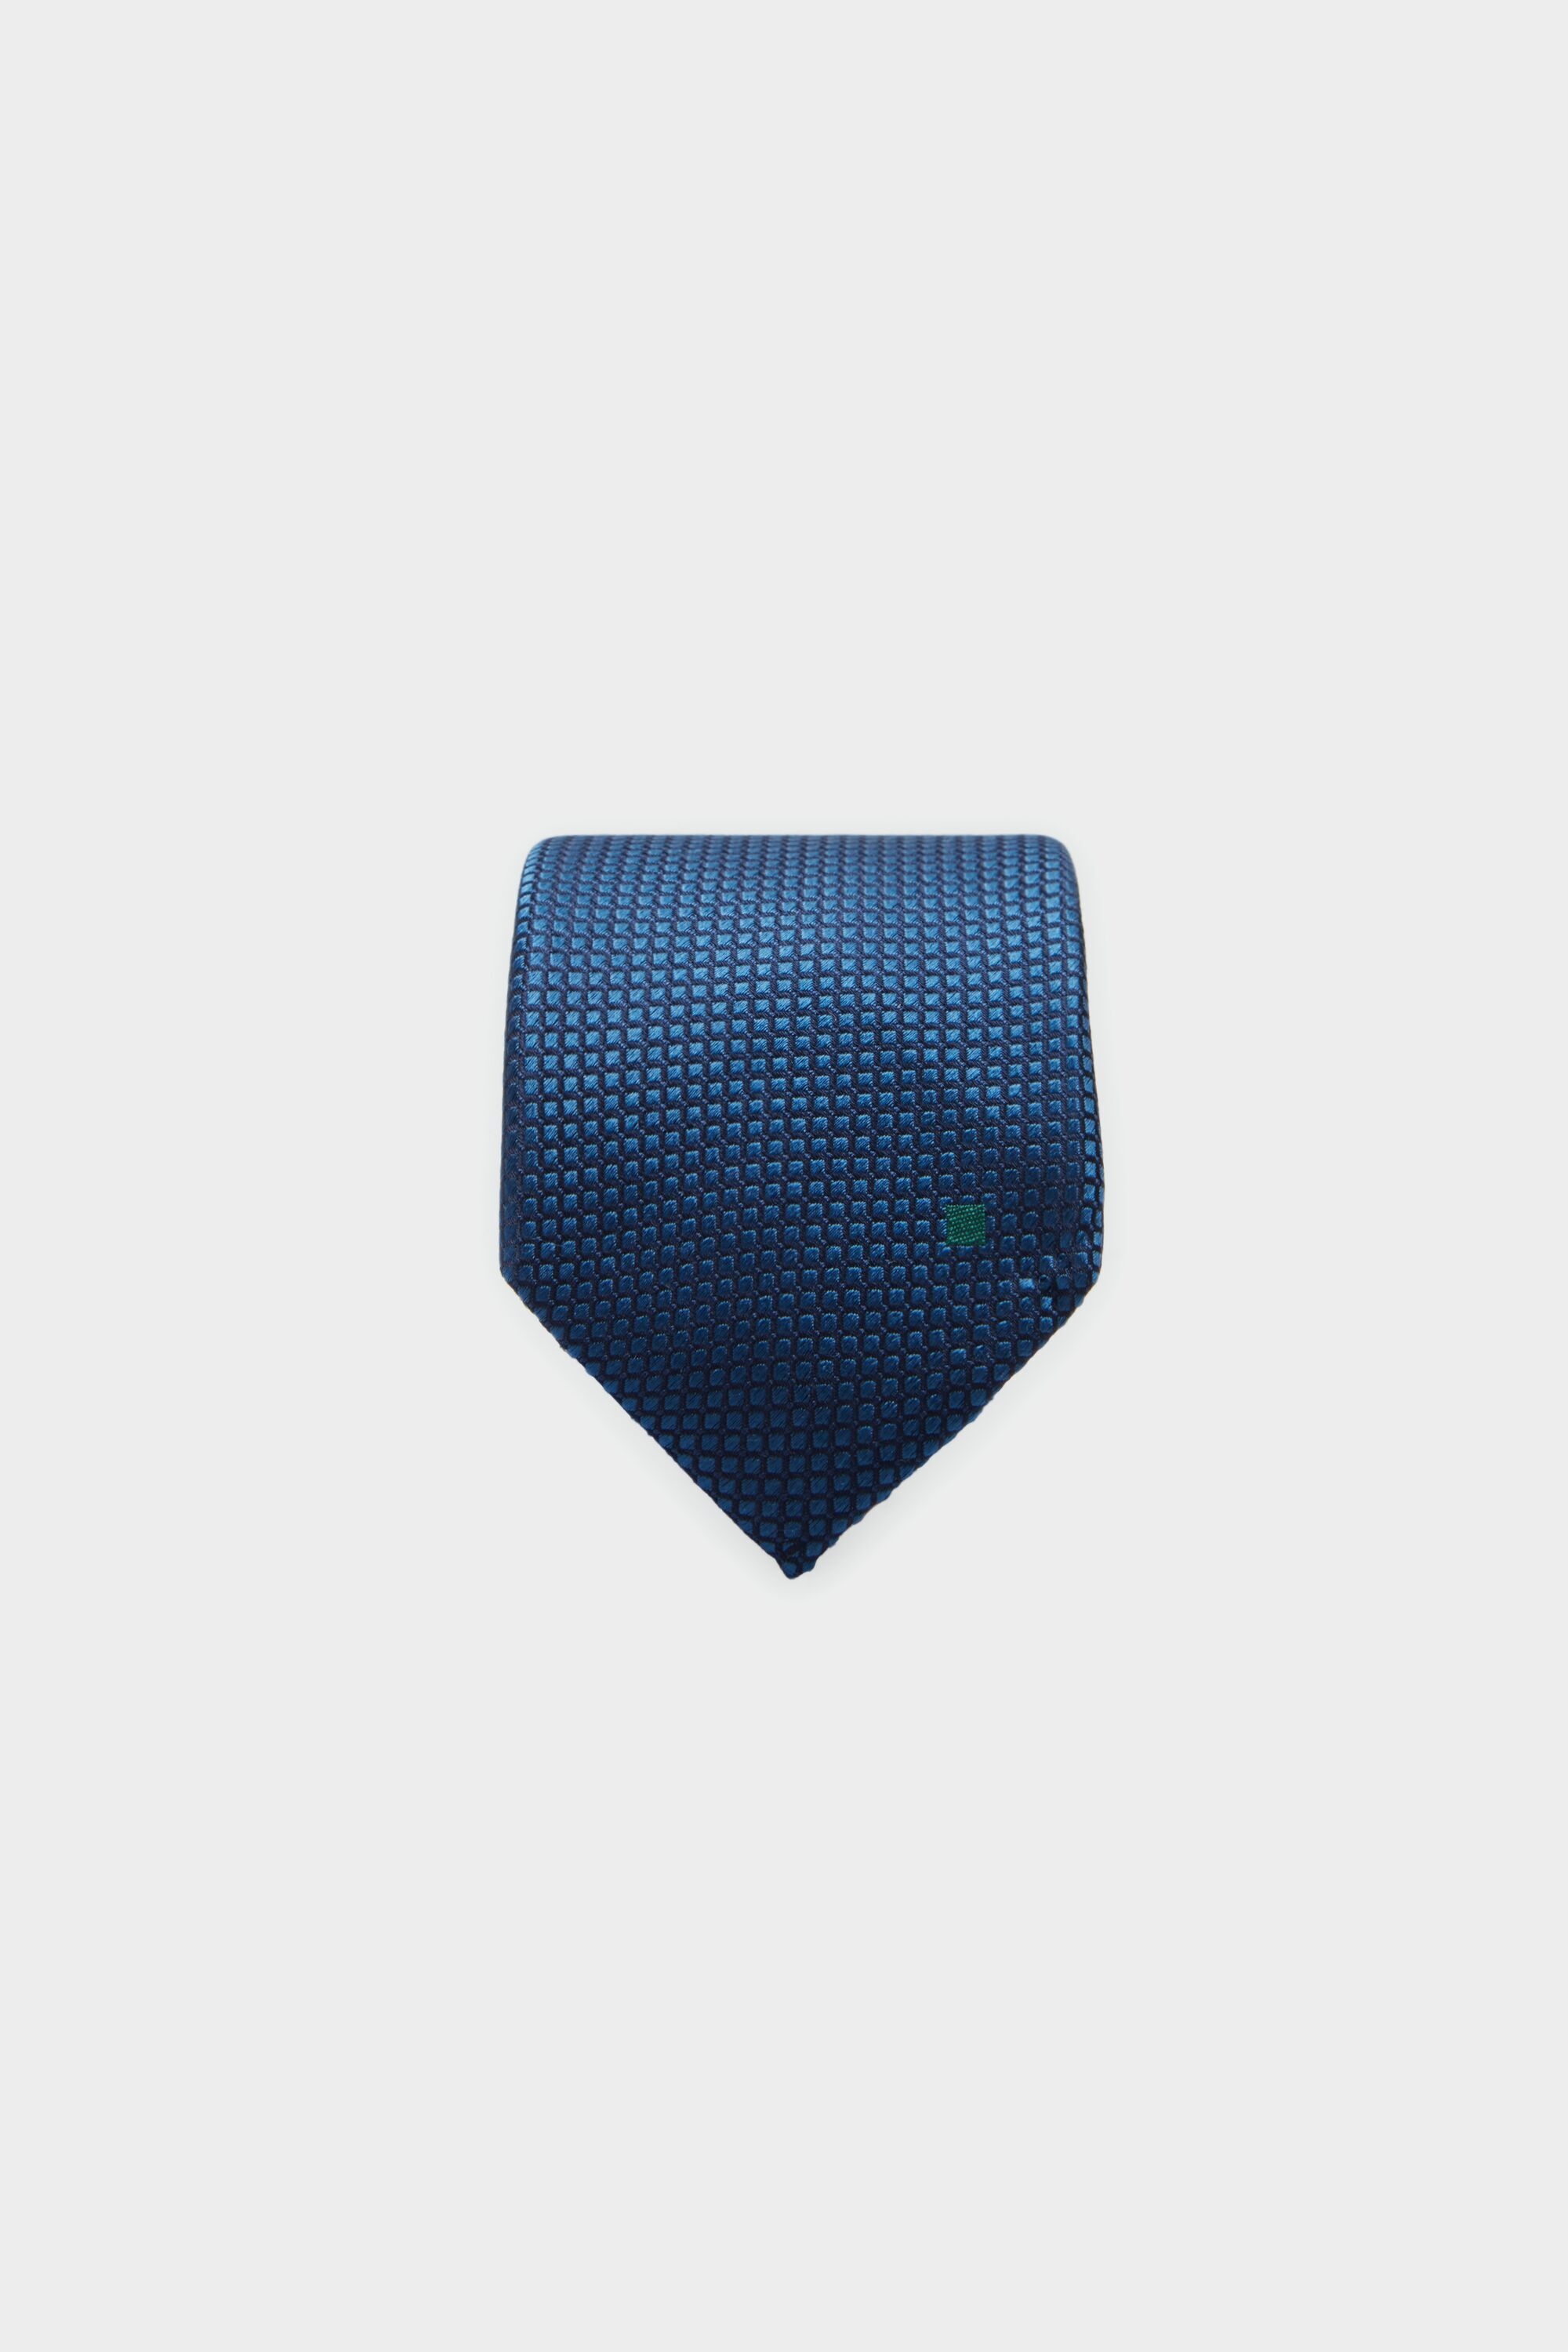 CUBE-SHAPED STRUCTURED SILK TIE